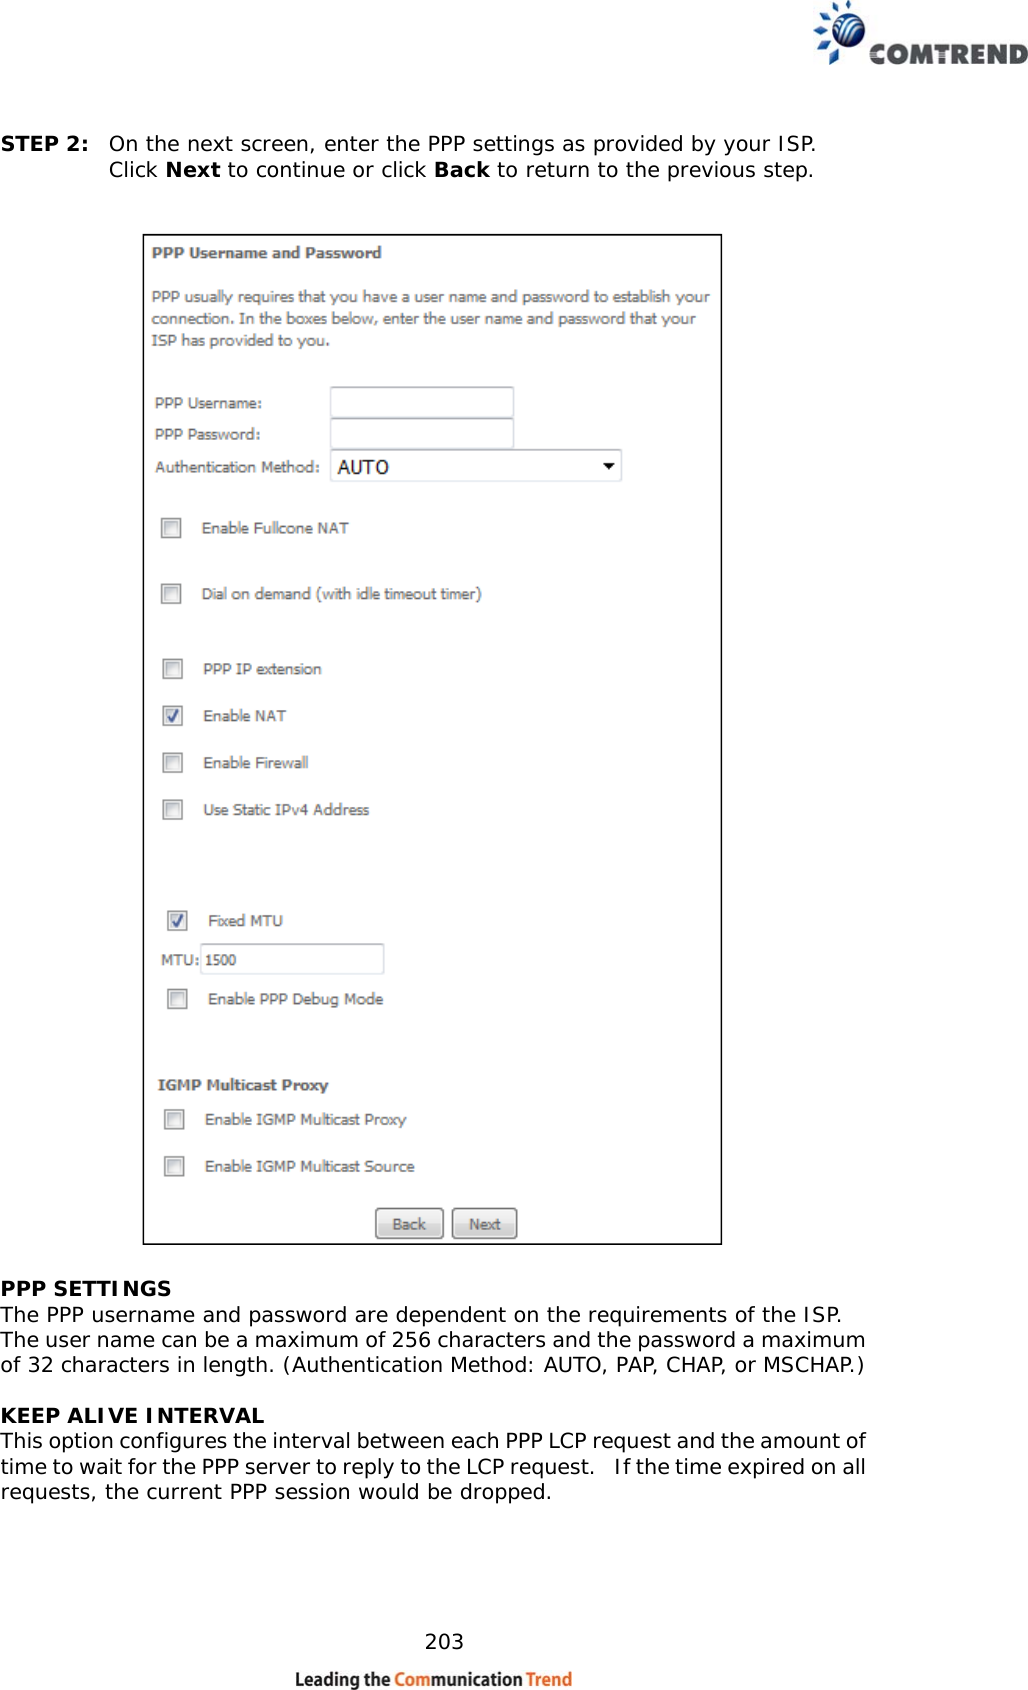    203 STEP 2:  On the next screen, enter the PPP settings as provided by your ISP.  Click Next to continue or click Back to return to the previous step.      PPP SETTINGS The PPP username and password are dependent on the requirements of the ISP.  The user name can be a maximum of 256 characters and the password a maximum of 32 characters in length. (Authentication Method: AUTO, PAP, CHAP, or MSCHAP.)  KEEP ALIVE INTERVAL This option configures the interval between each PPP LCP request and the amount of time to wait for the PPP server to reply to the LCP request.   If the time expired on all requests, the current PPP session would be dropped.   